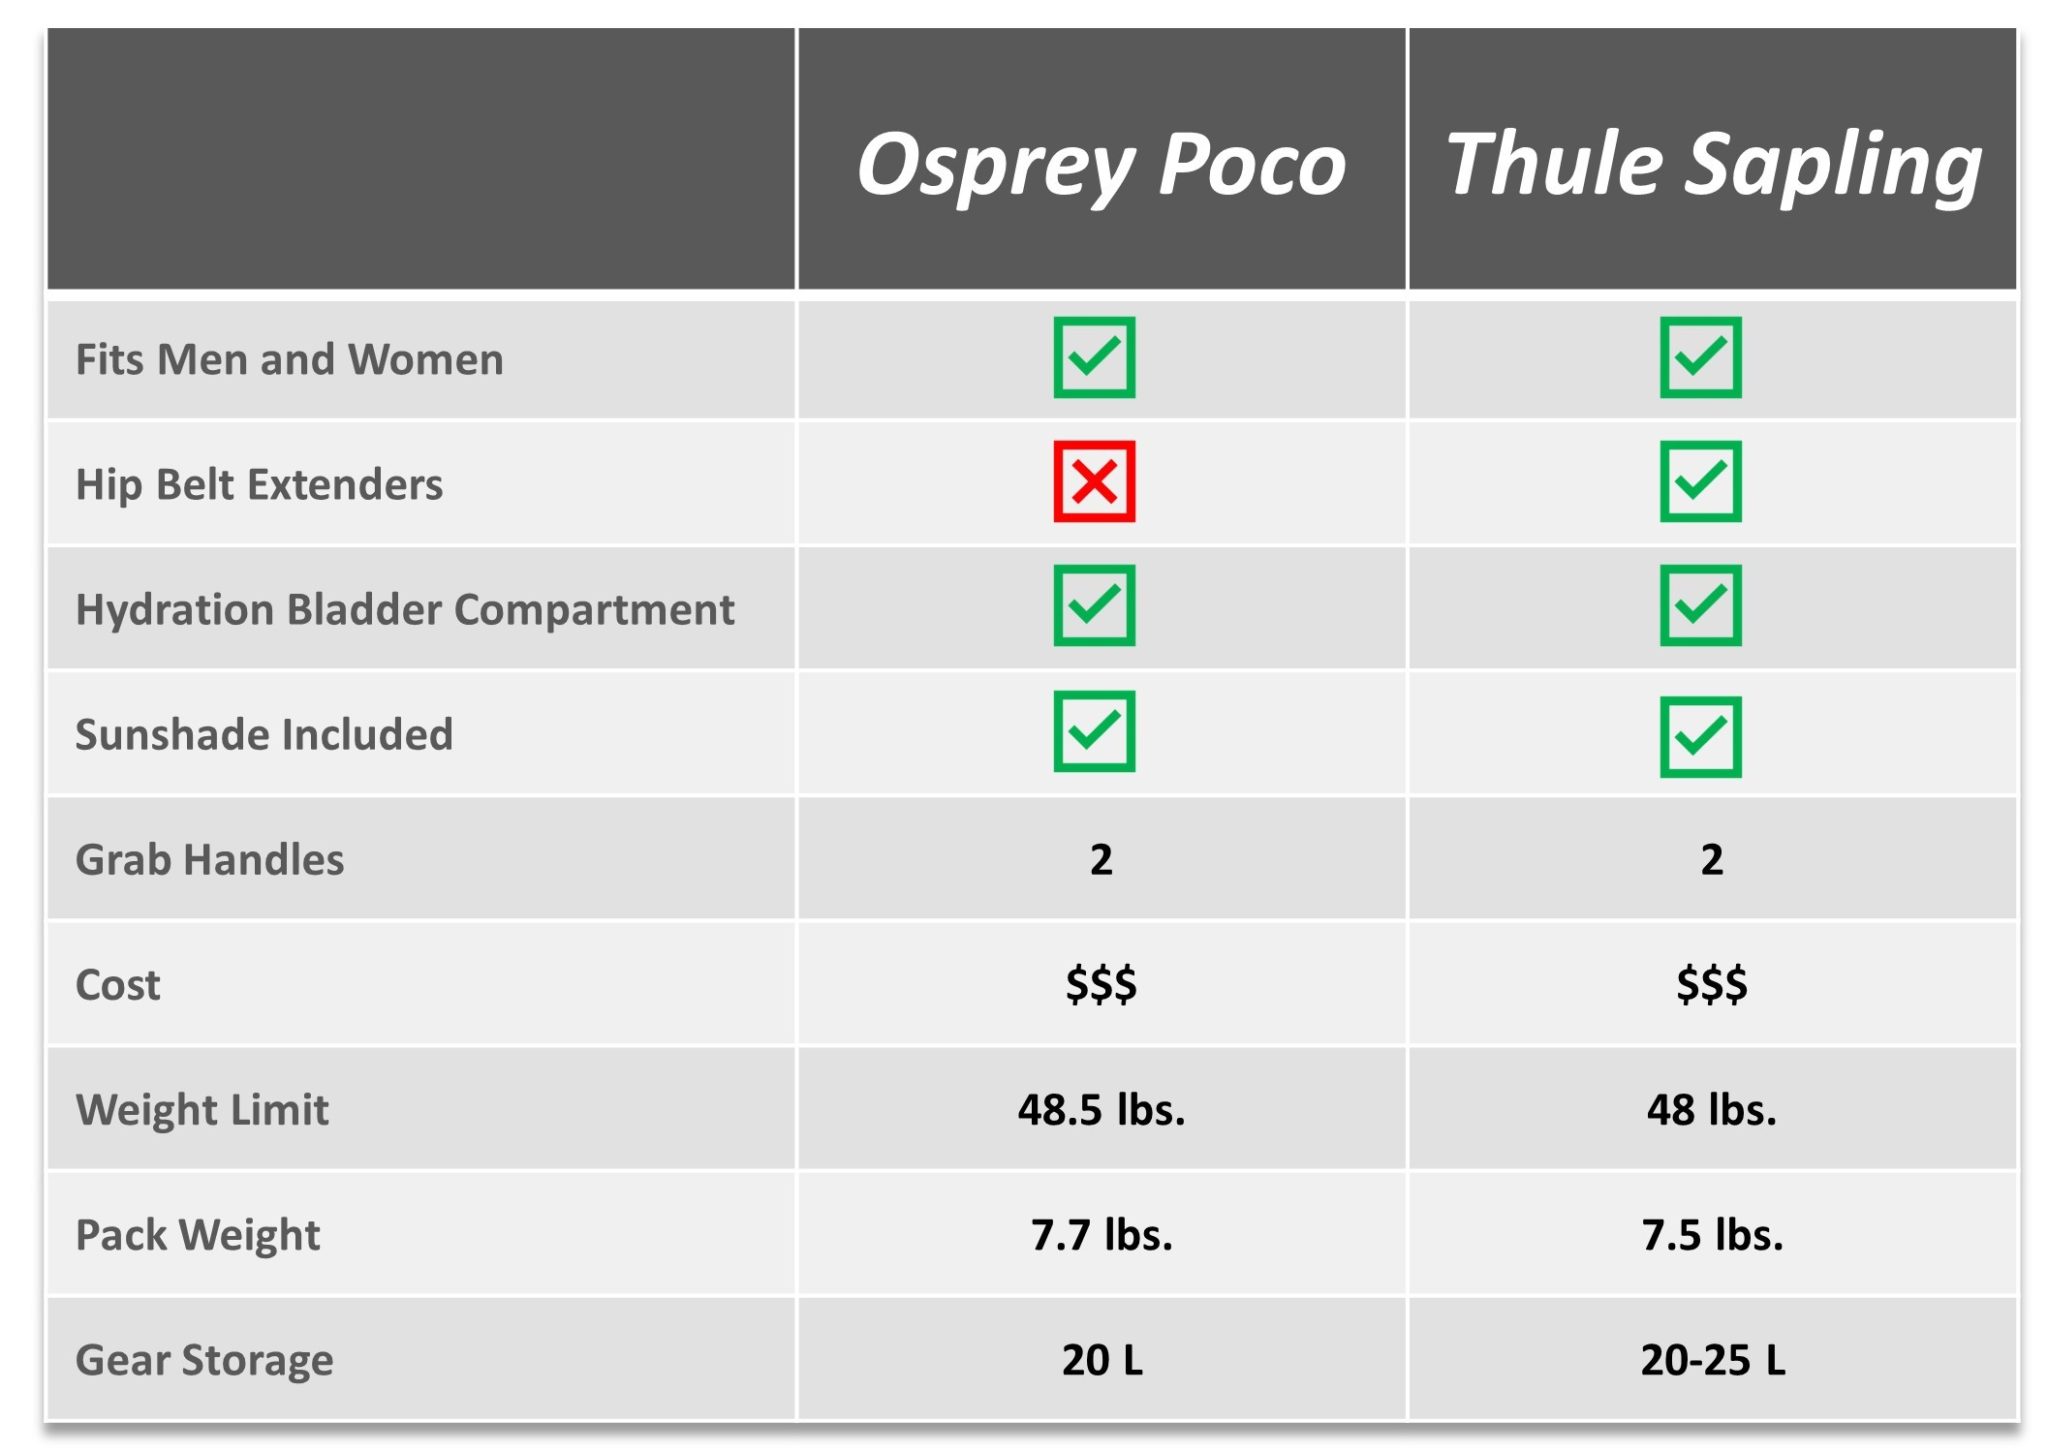 Osprey Poco vs Thule Sapling comparison chart for features